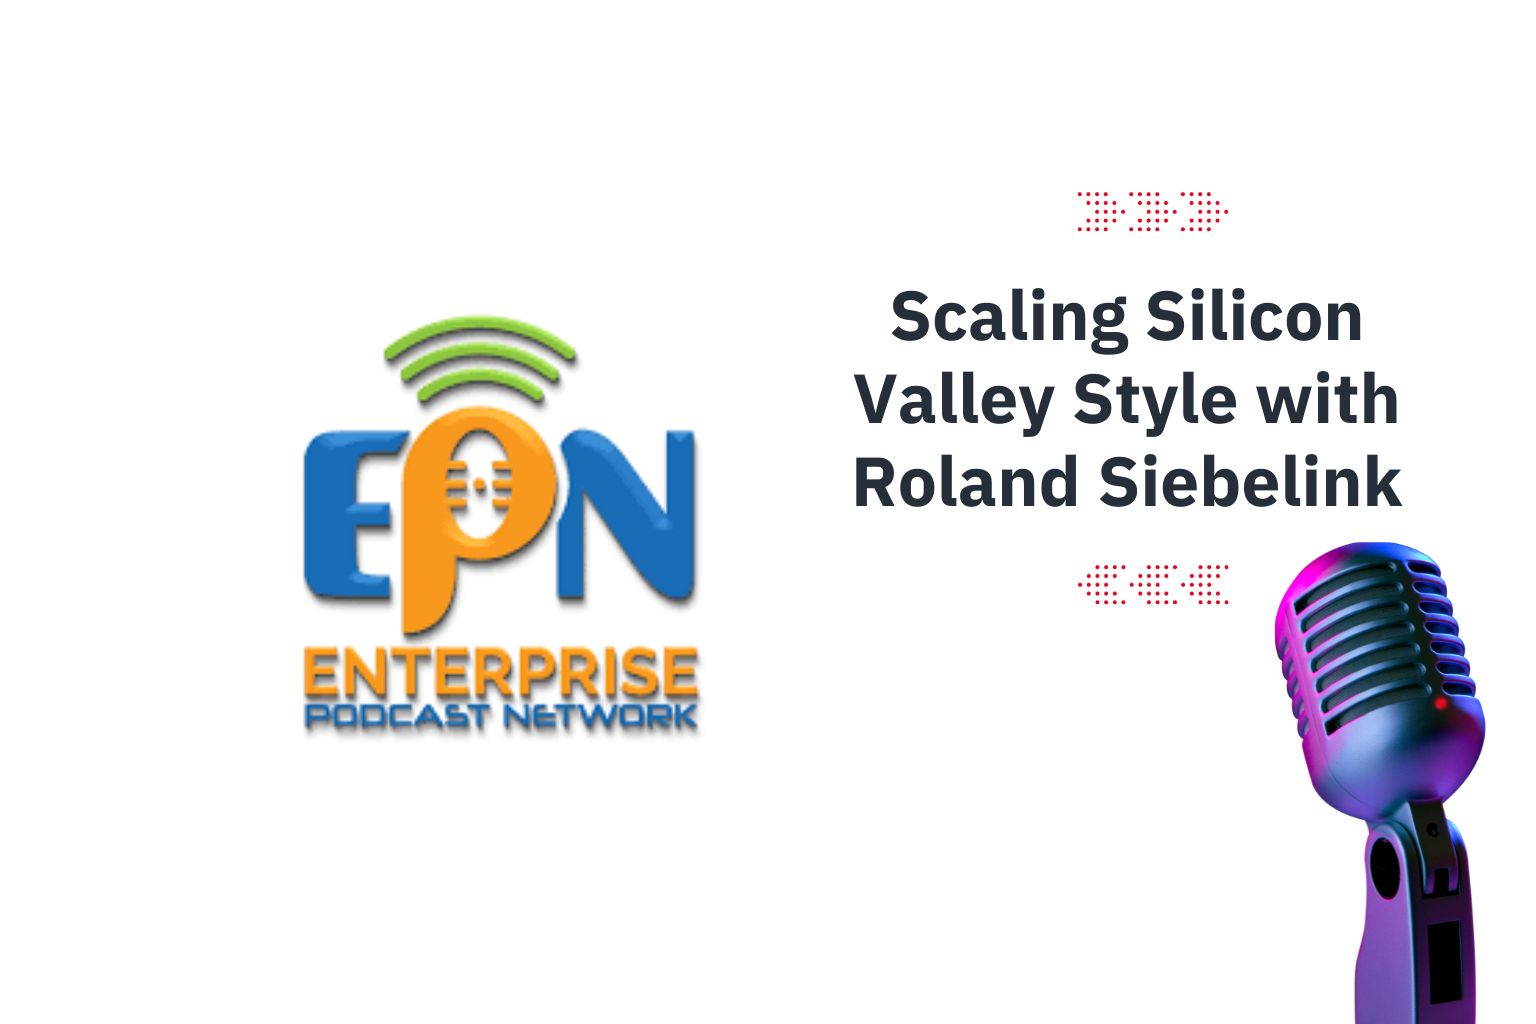 Scaling Silicon Valley Style with Roland Siebelink